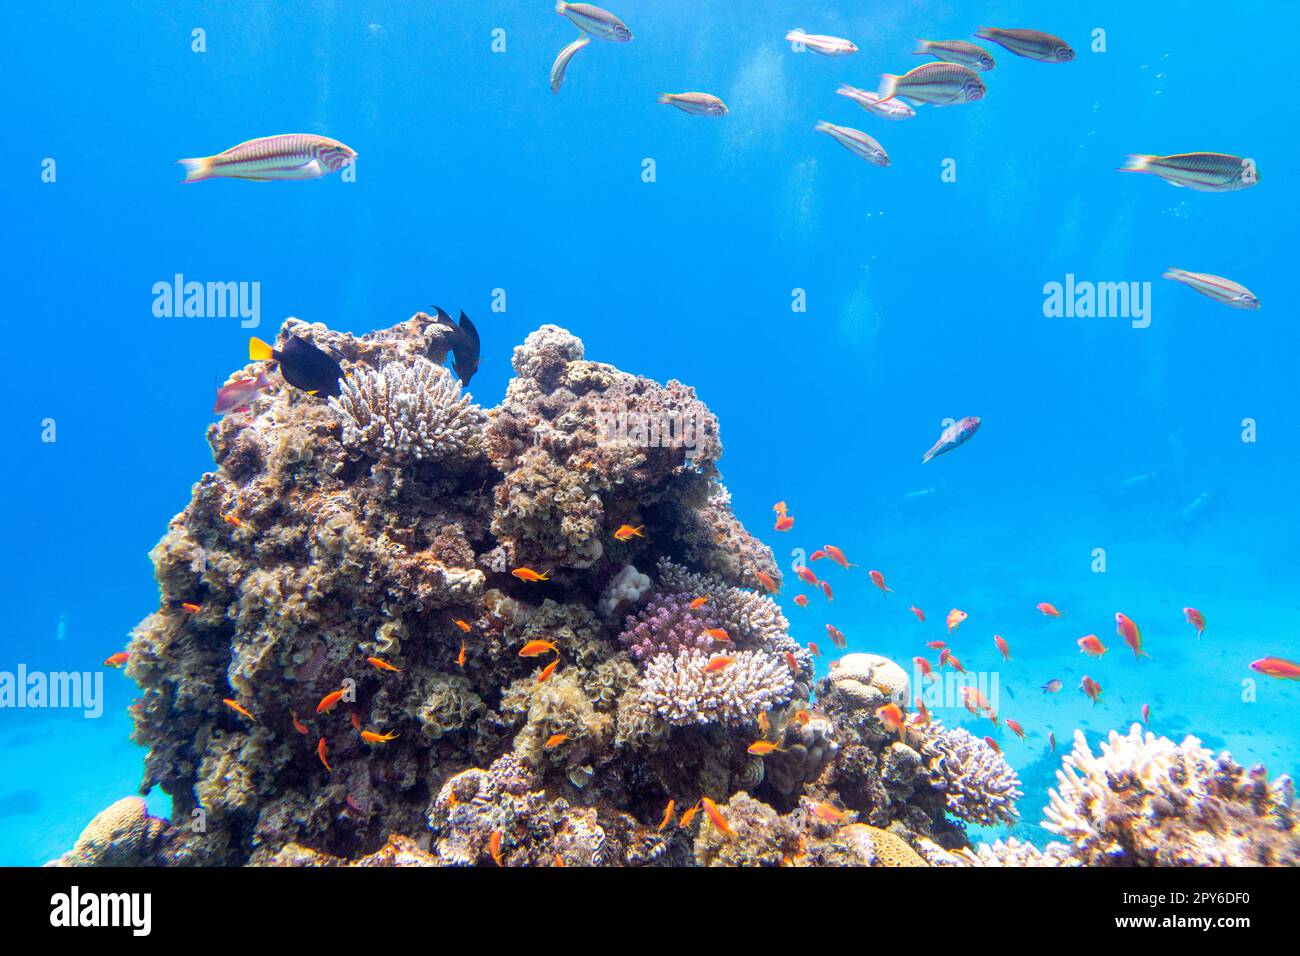 Colorful, picturesque coral reef at bottom of tropical sea, anthias and thalassoma fishes, underwater landscape Stock Photo